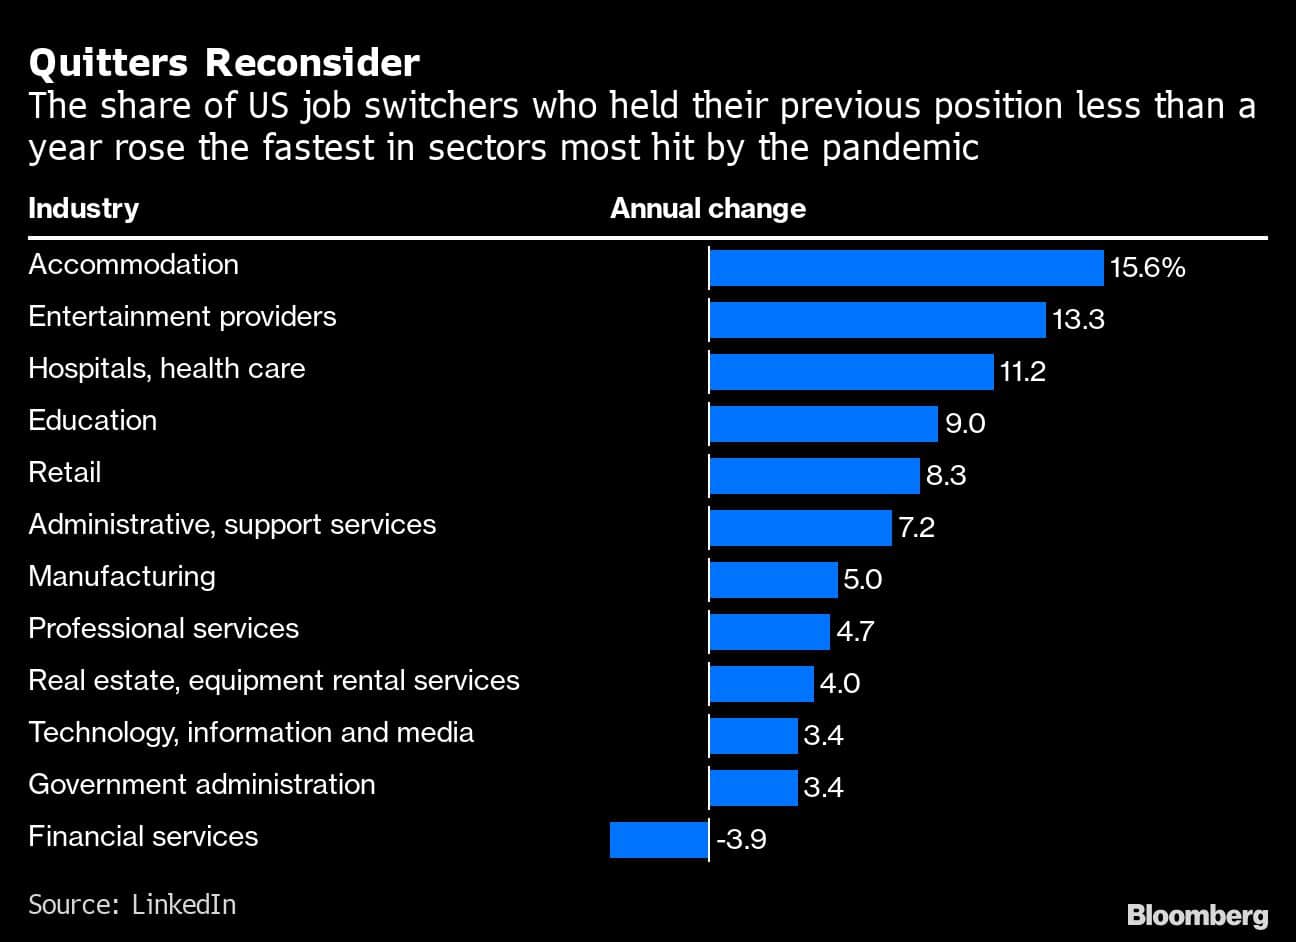 Quitters Reconsider | The share of US job switchers who held their previous position less than a year rose the fastest in sectors most hit by the pandemic